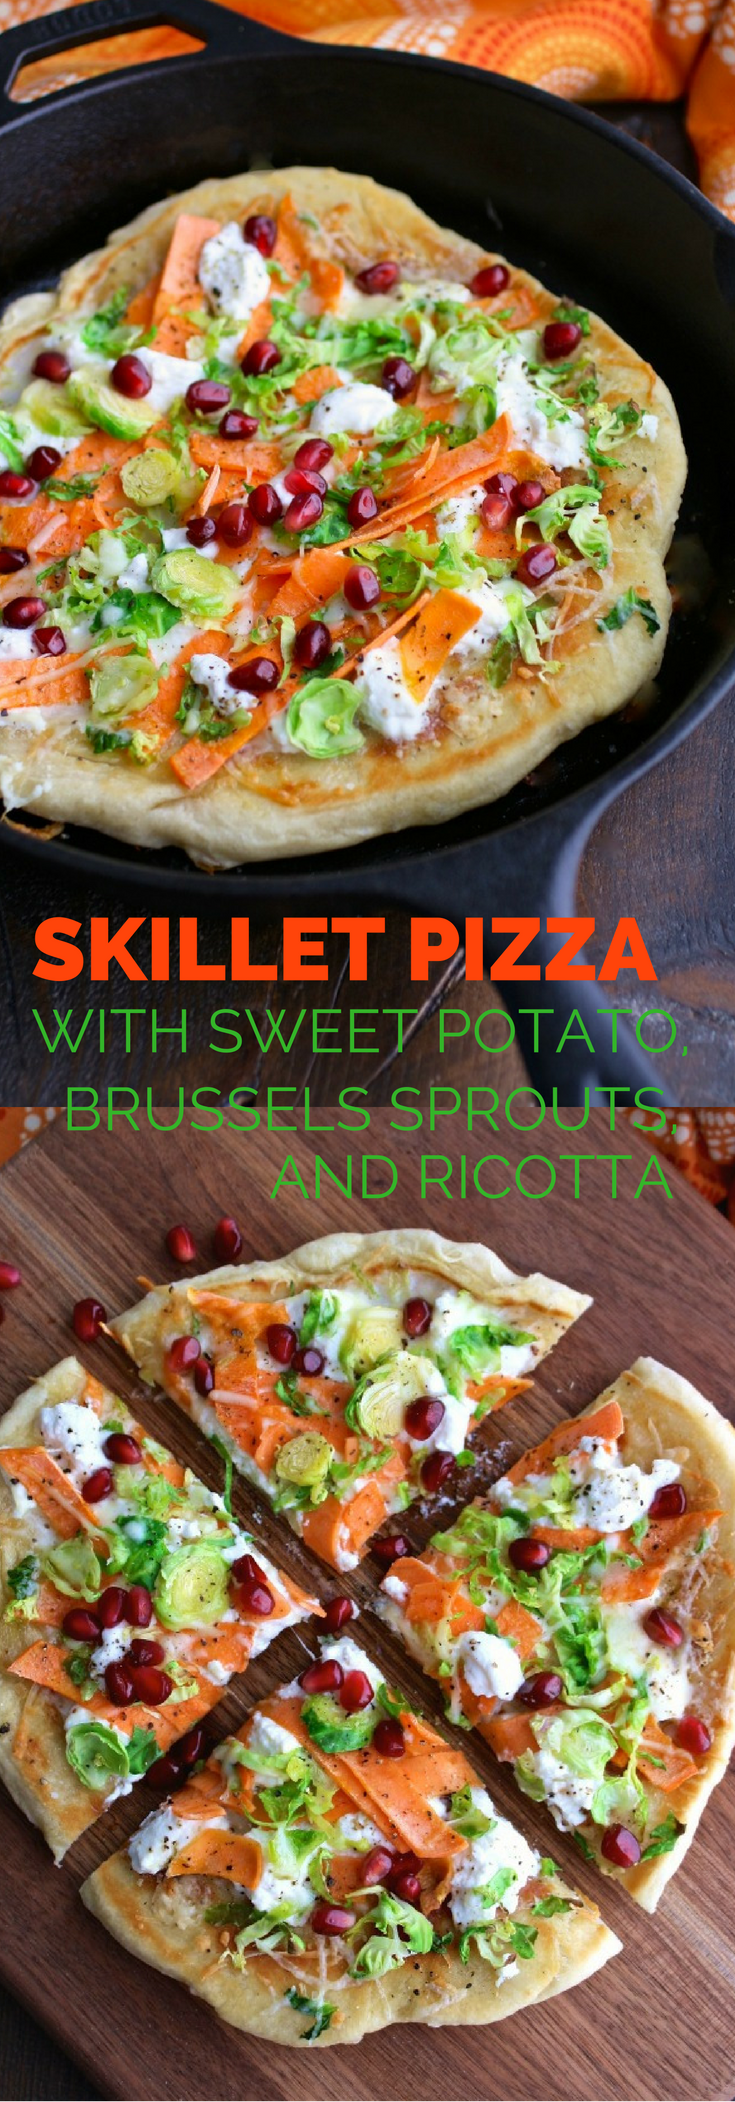 A seasonal pizza: Skillet Pizza with Sweet Potatoes, Brussels Sprouts, and Ricotta!